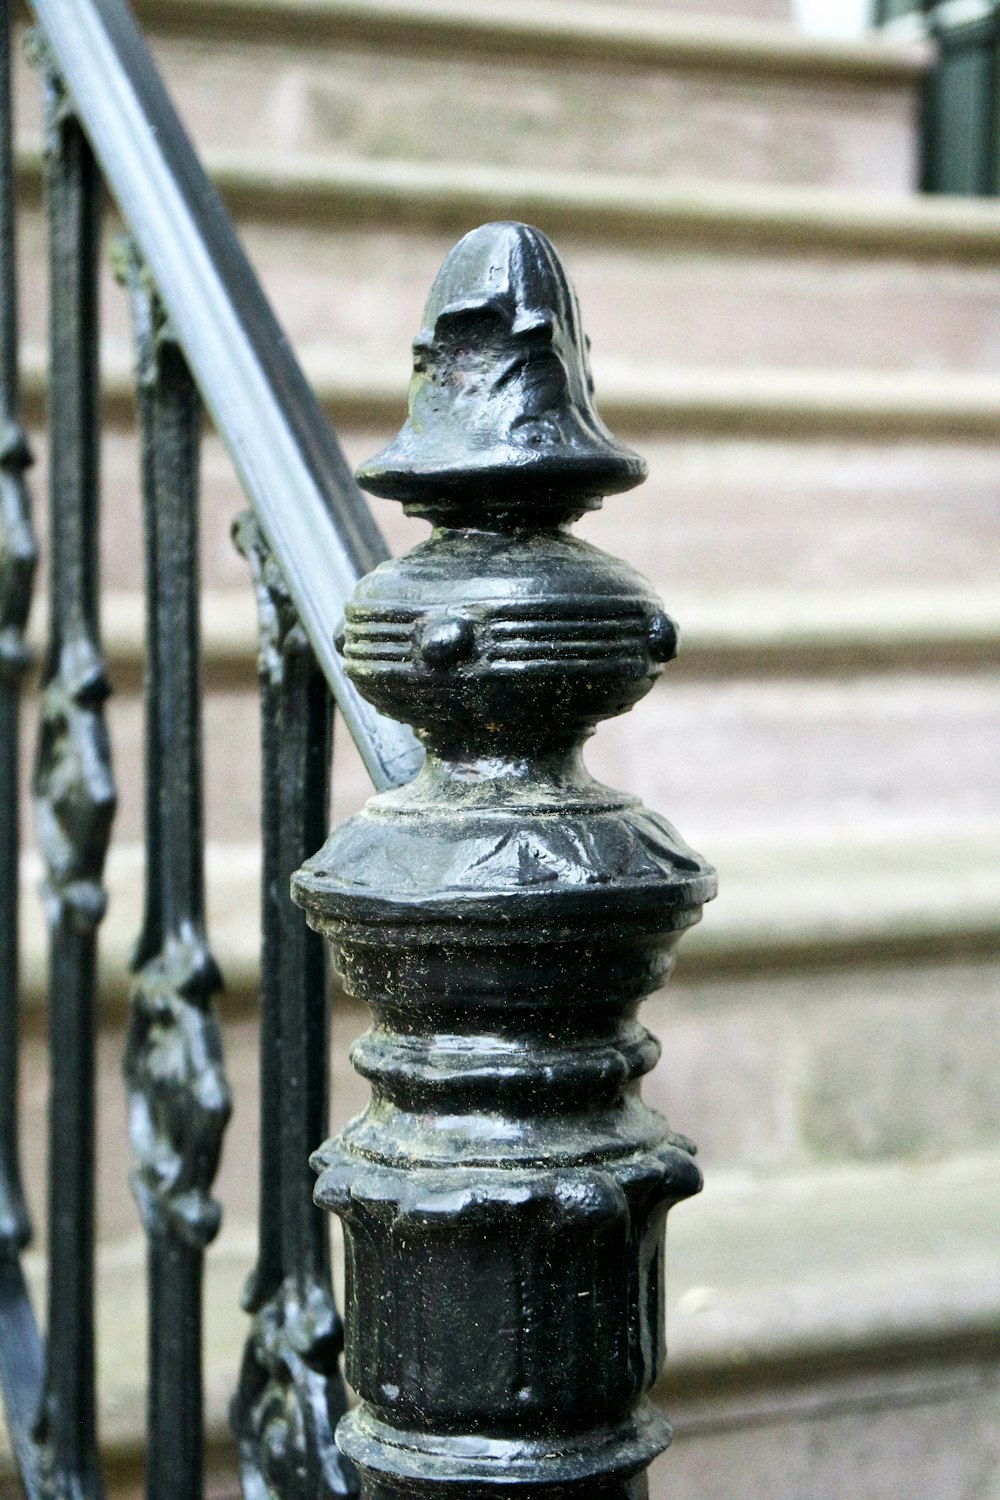 a close up of a metal railing with steps in the background